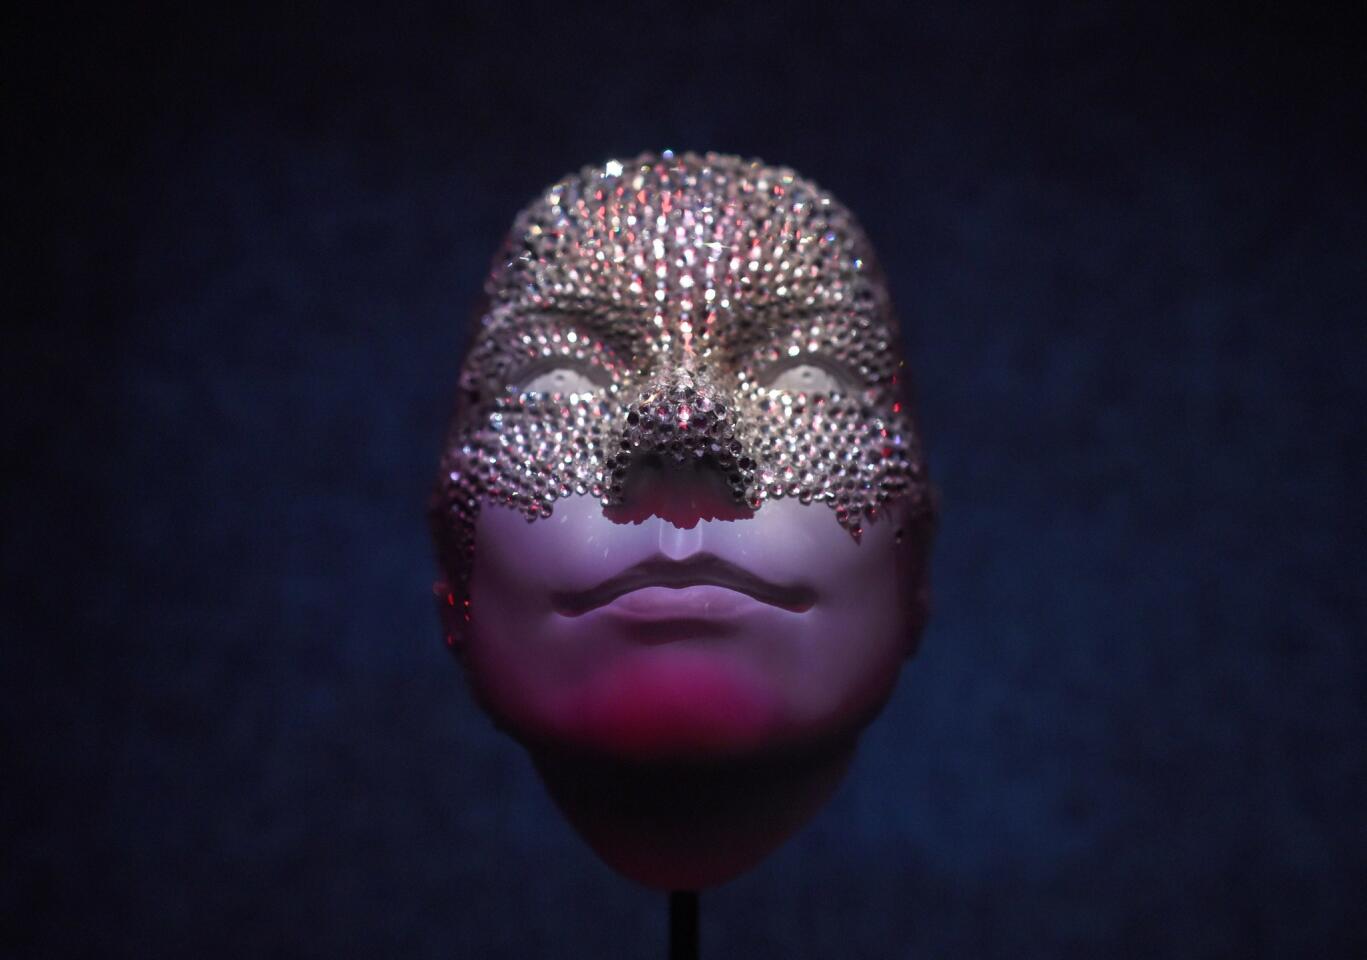 The Museum of Modern Art's new Bjork exhibit, on display through June 27, explores the singer's career, featuring music, costumes, stage props and interactive audio.